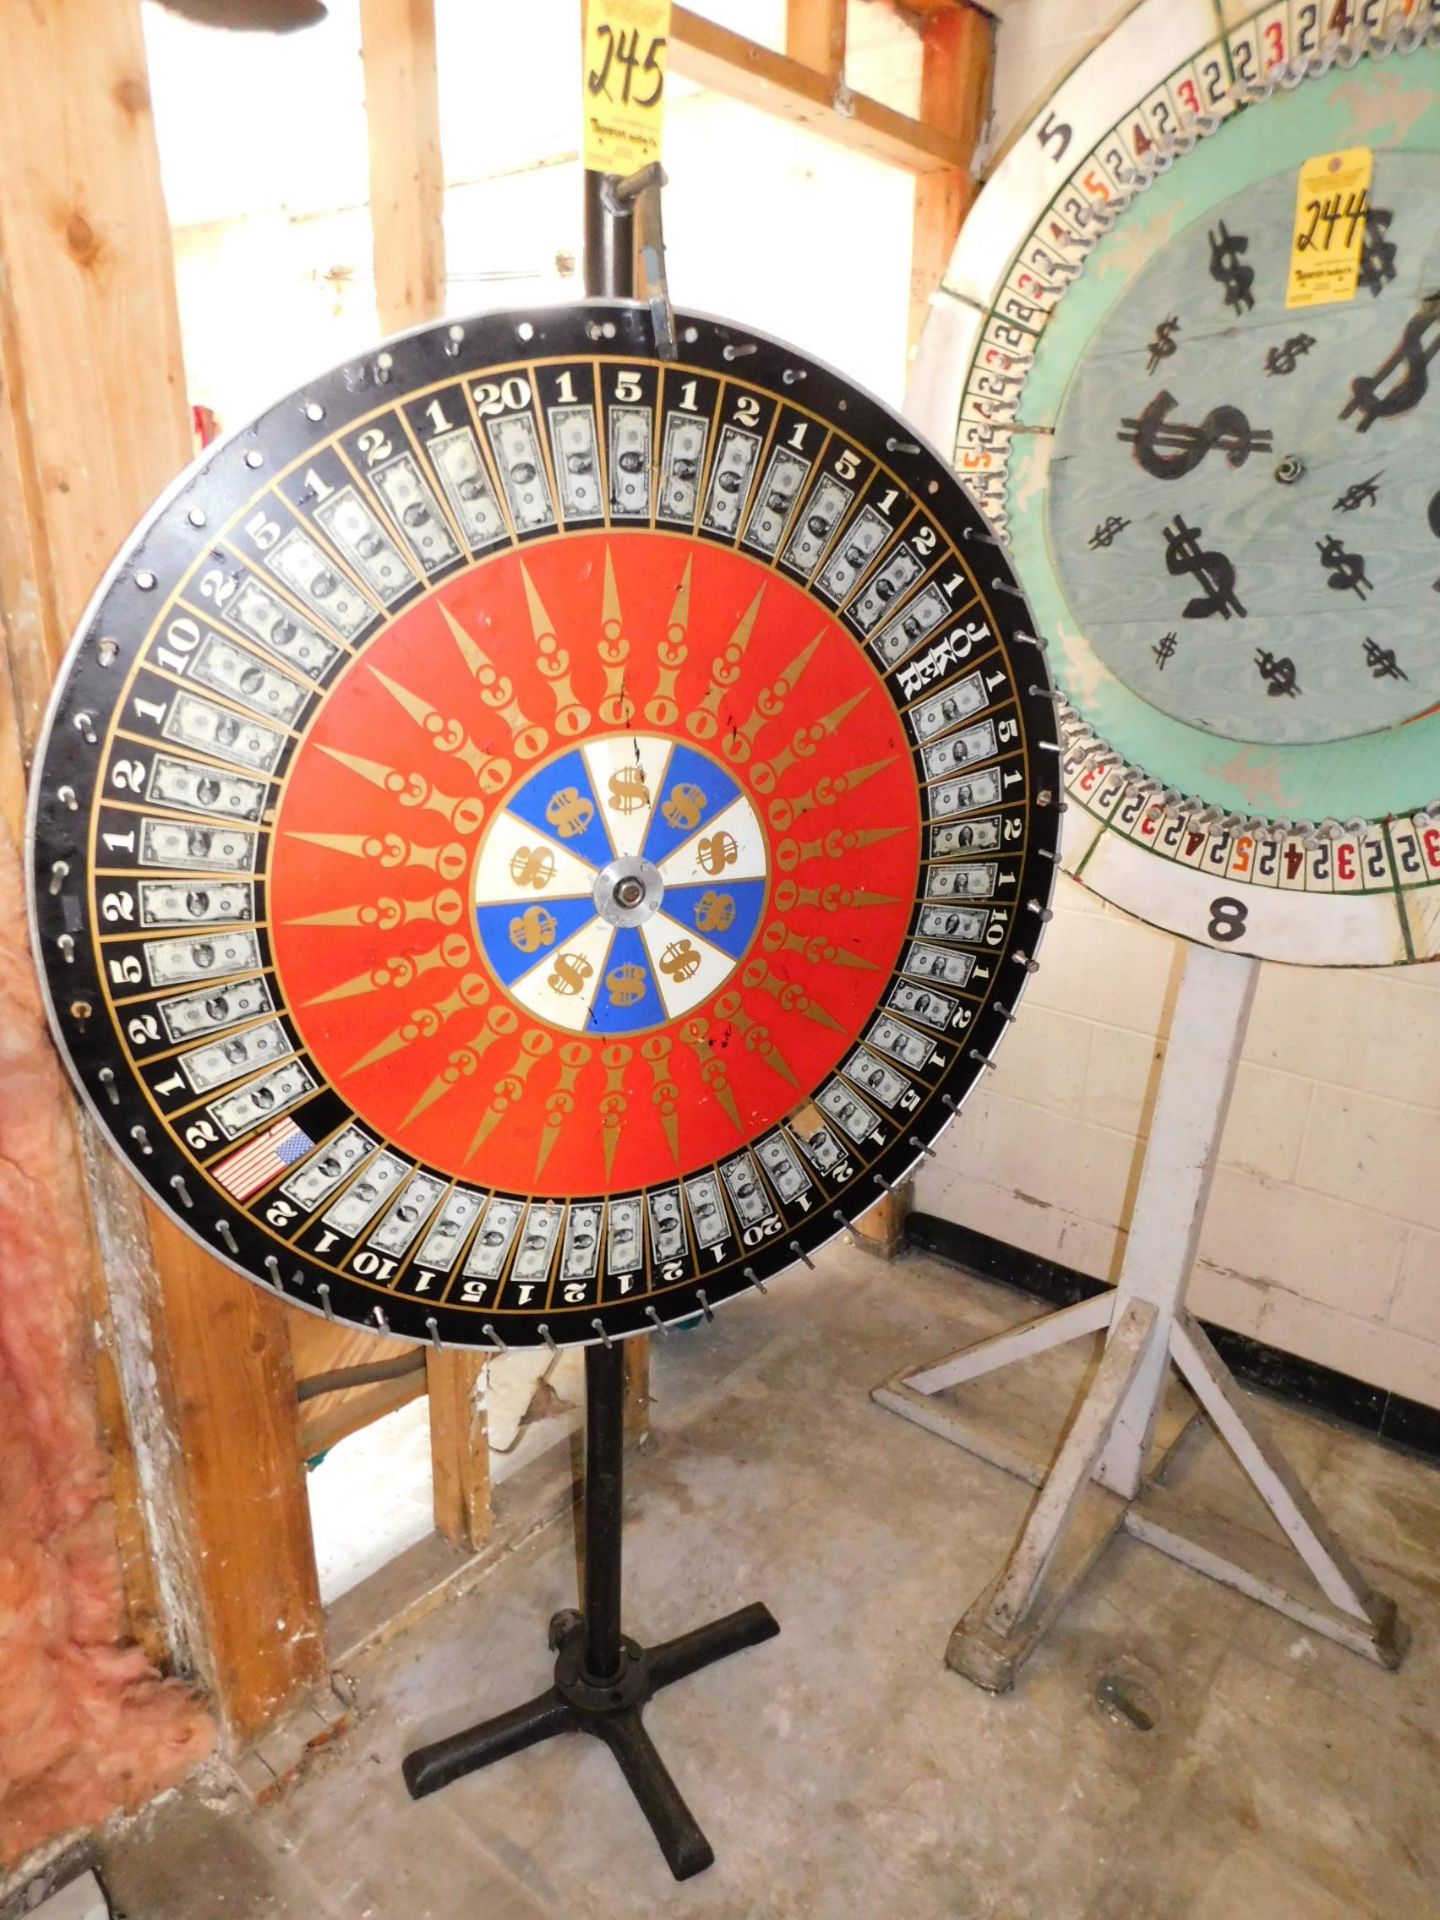 Game of Chance Spinning Wheel